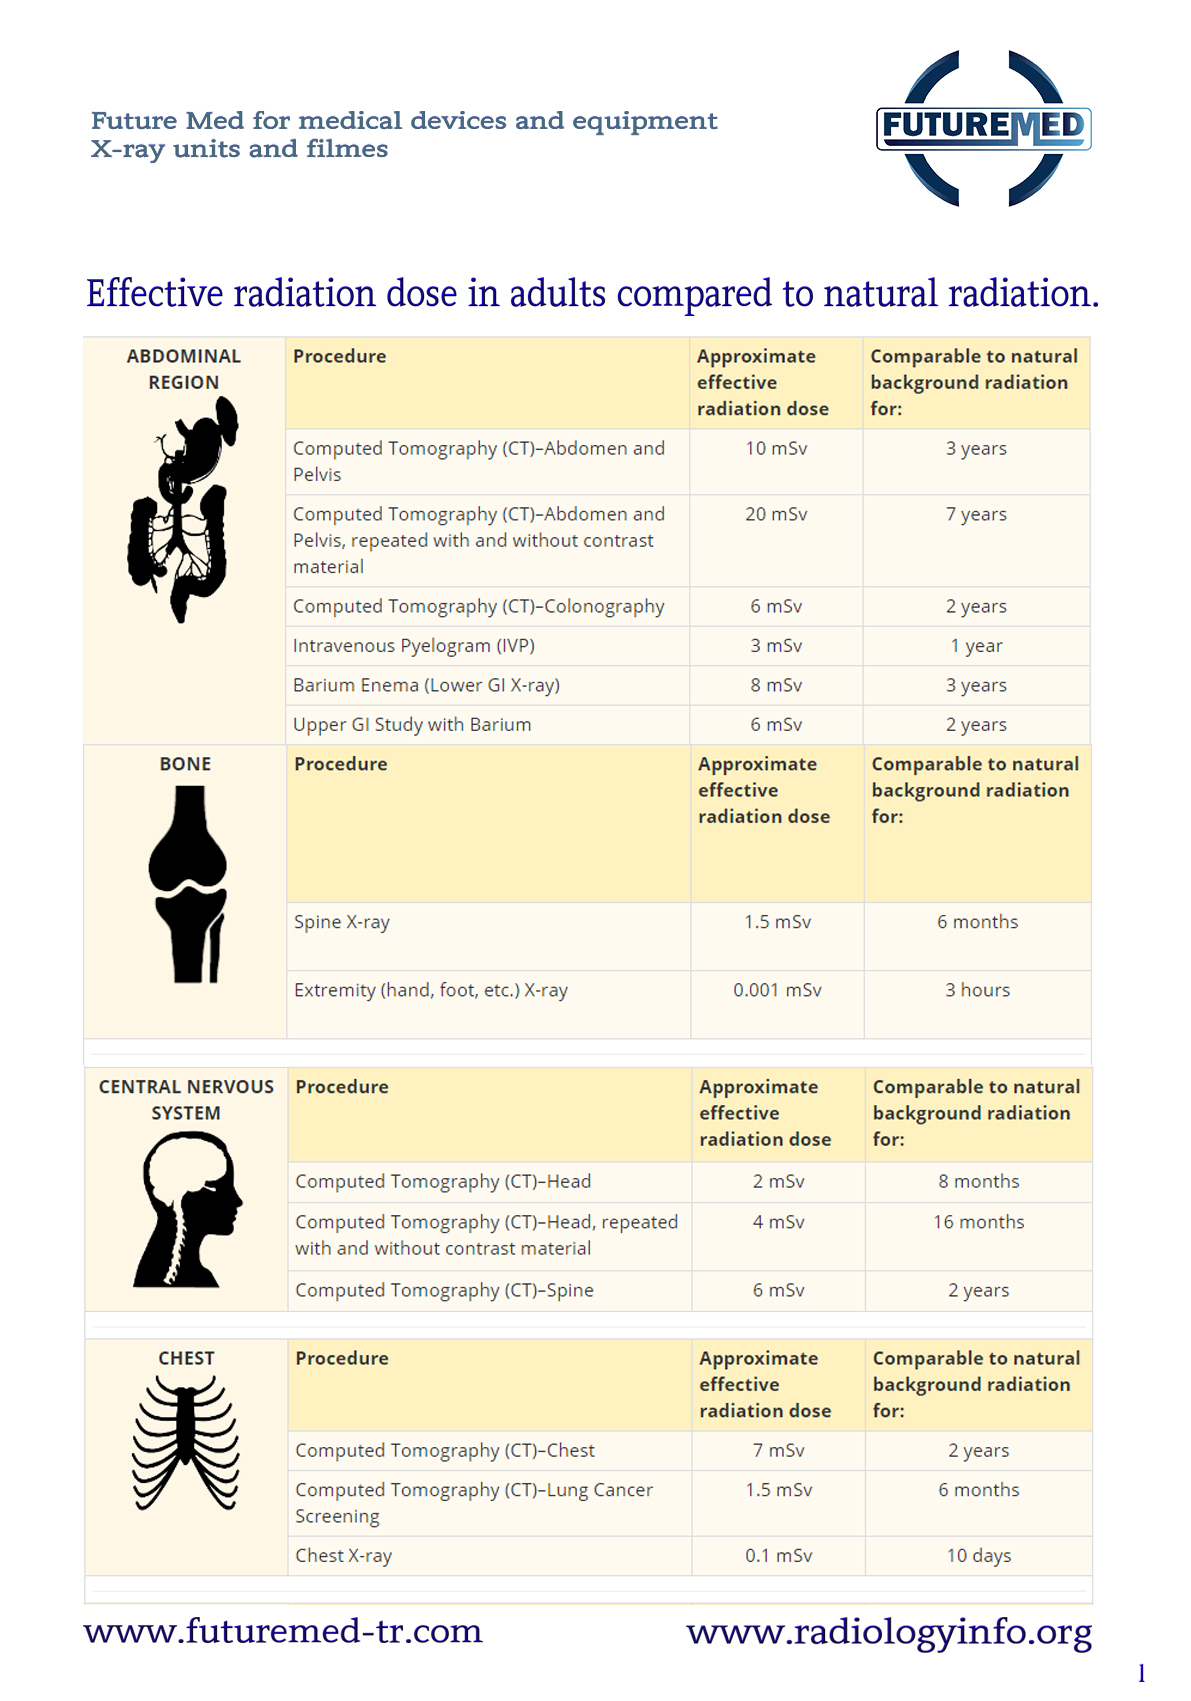 Effective radiation dose in adults compared to natural radiation.